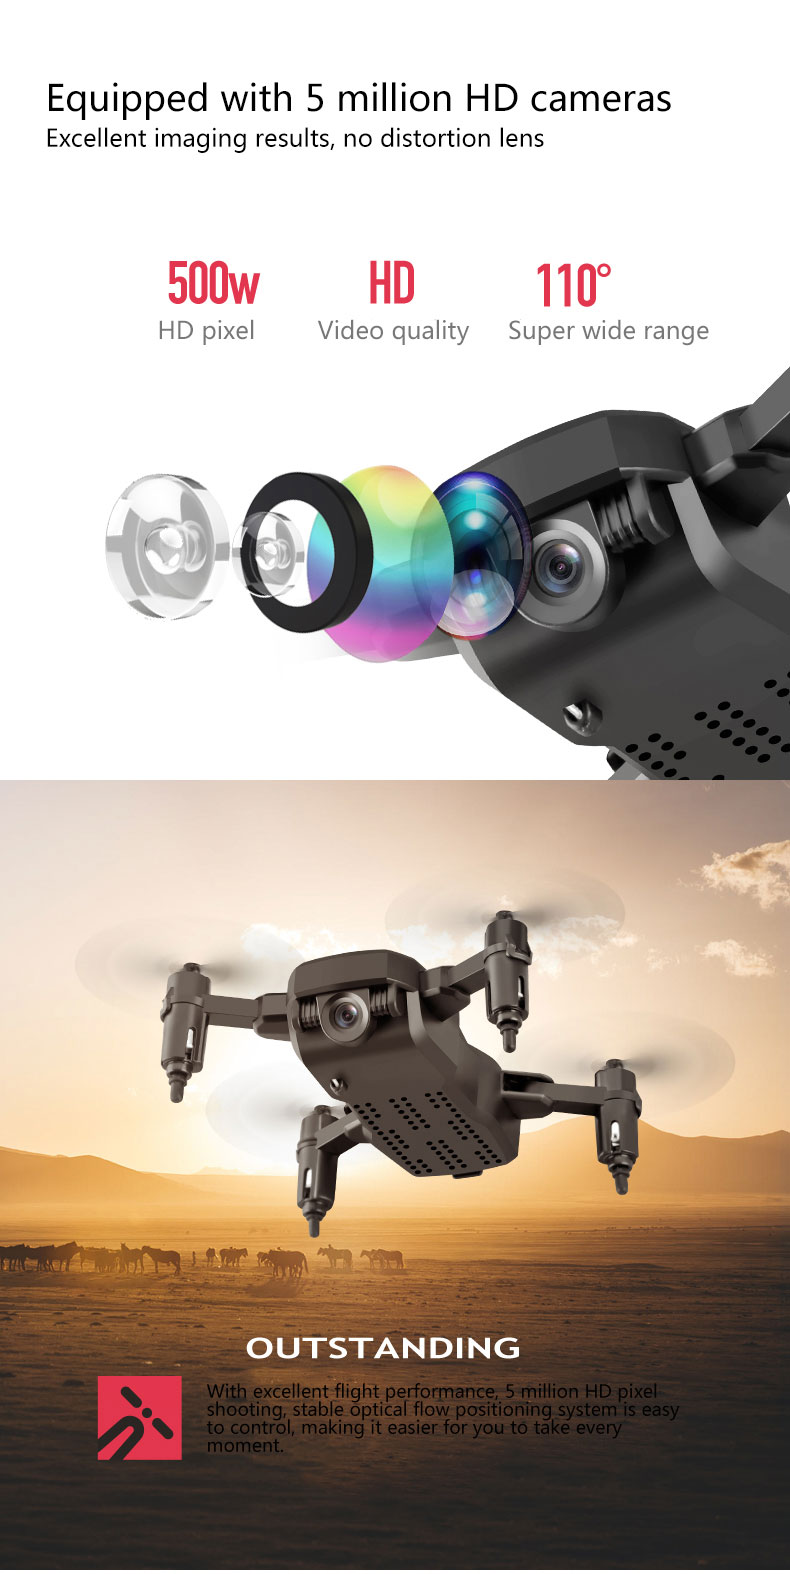 New Mini Drone with 4K Camera HD Foldable Drones One-Key Return FPV Quadcopter Follow Me RC Helicopter Quadrocopter Kid's Toys